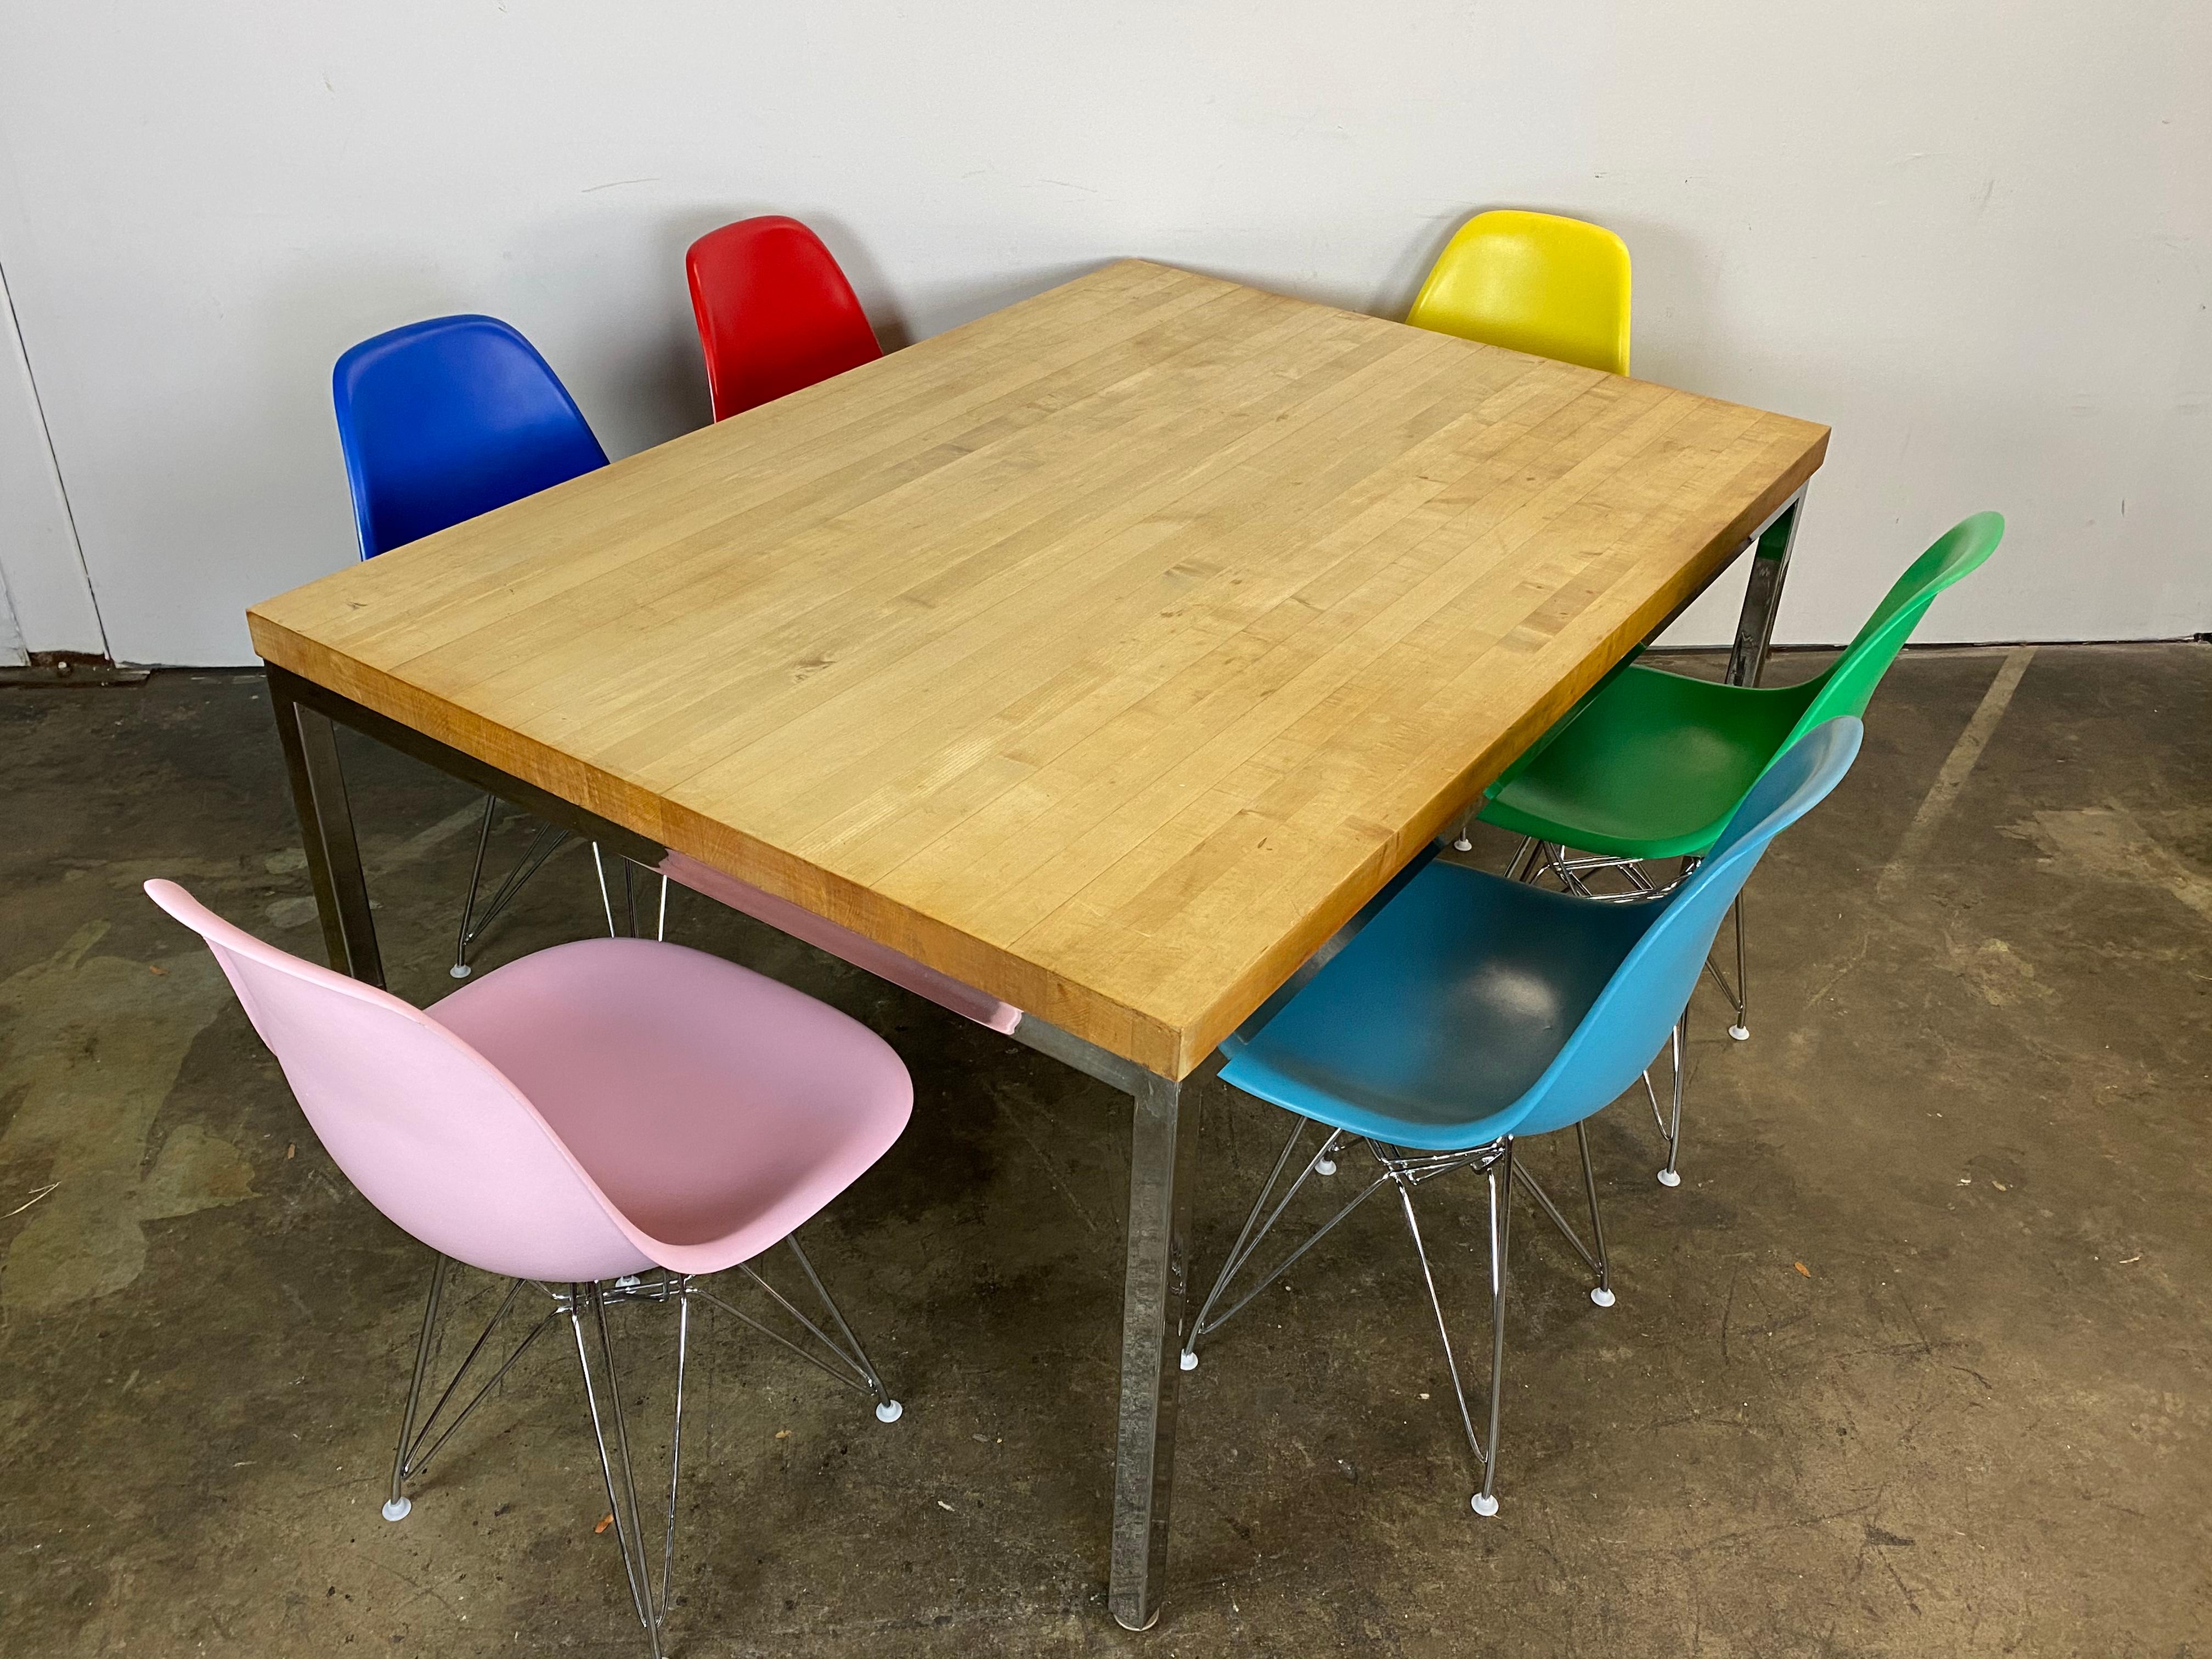 Mid-Century Modern dining set featuring maple butcher block top on steel frame. Six vintage authentic signed Herman Miller Eames fiberglass shell chairs. Originally upholstered, these have been stripped and recoated in fun colors. New chrome Eiffel